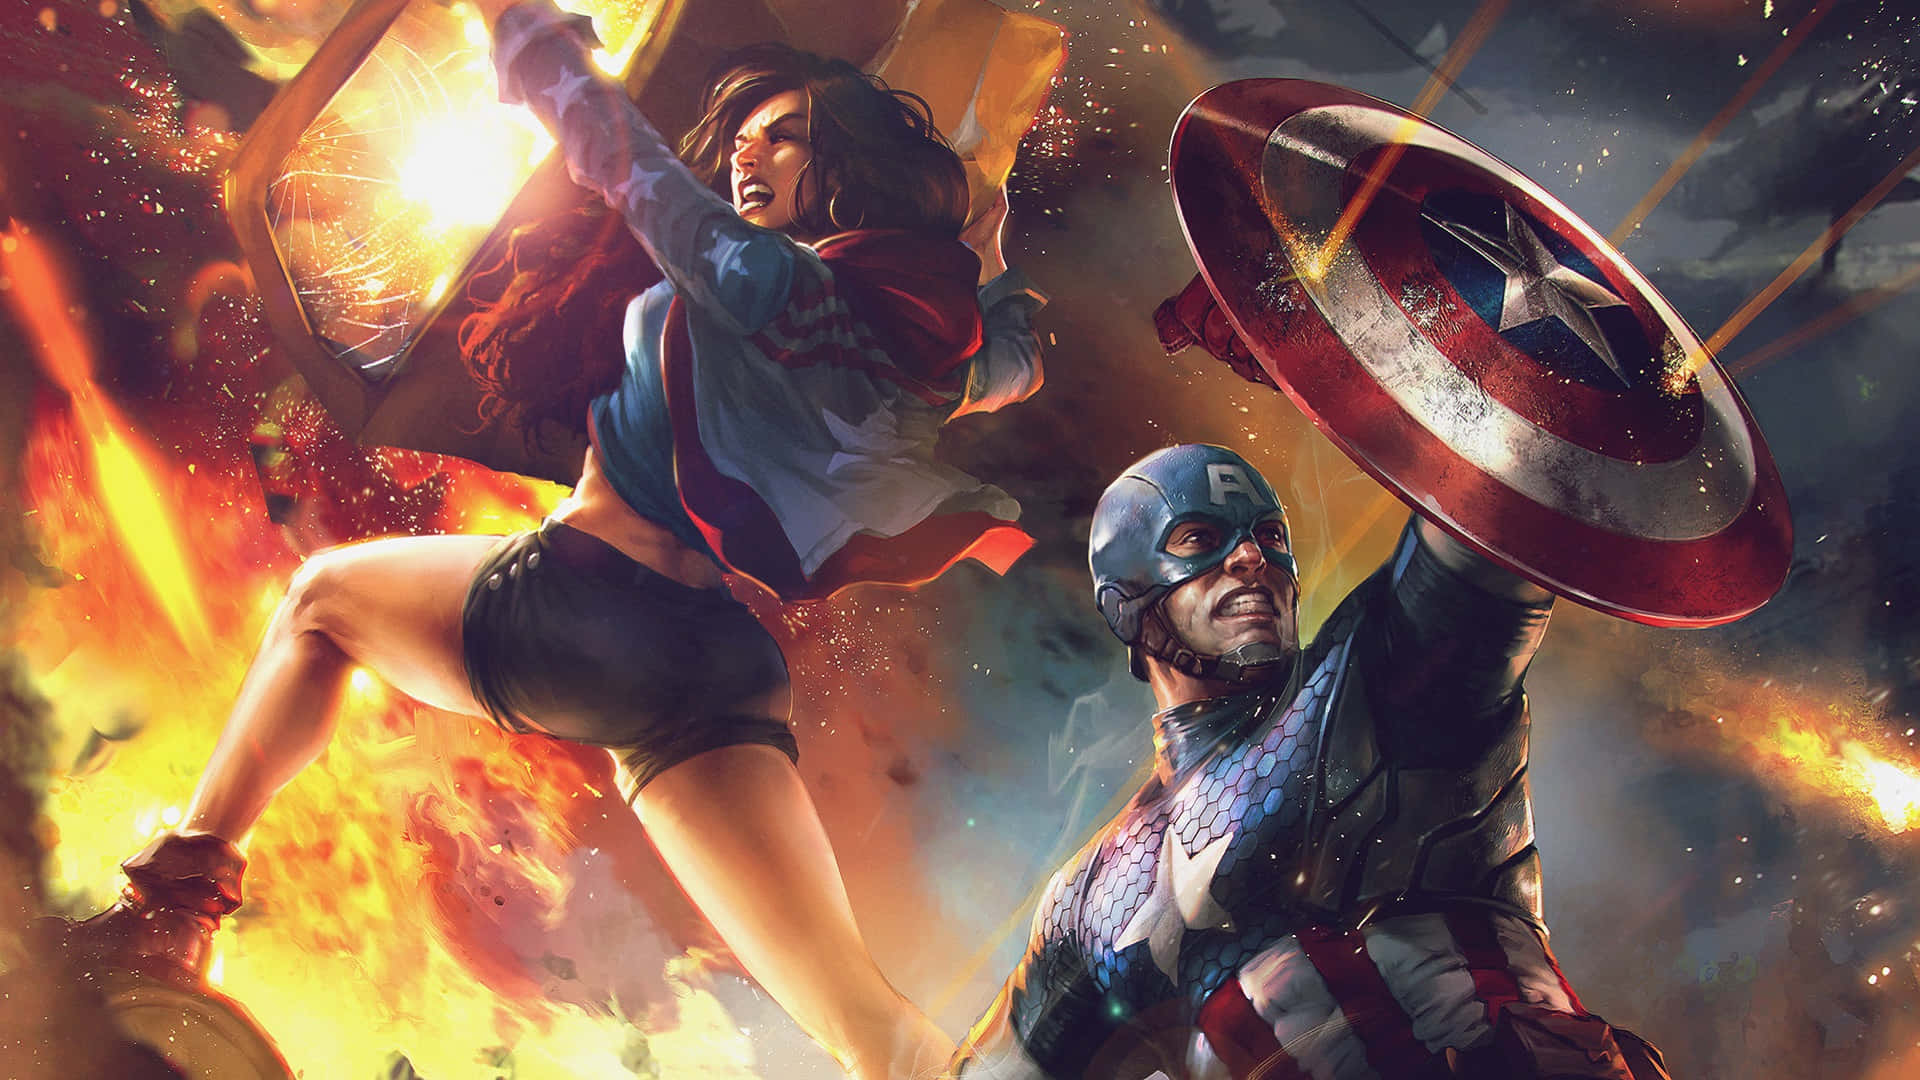 Experience the action of CAPTAIN AMERICA in epic dual-screen resolution! Wallpaper